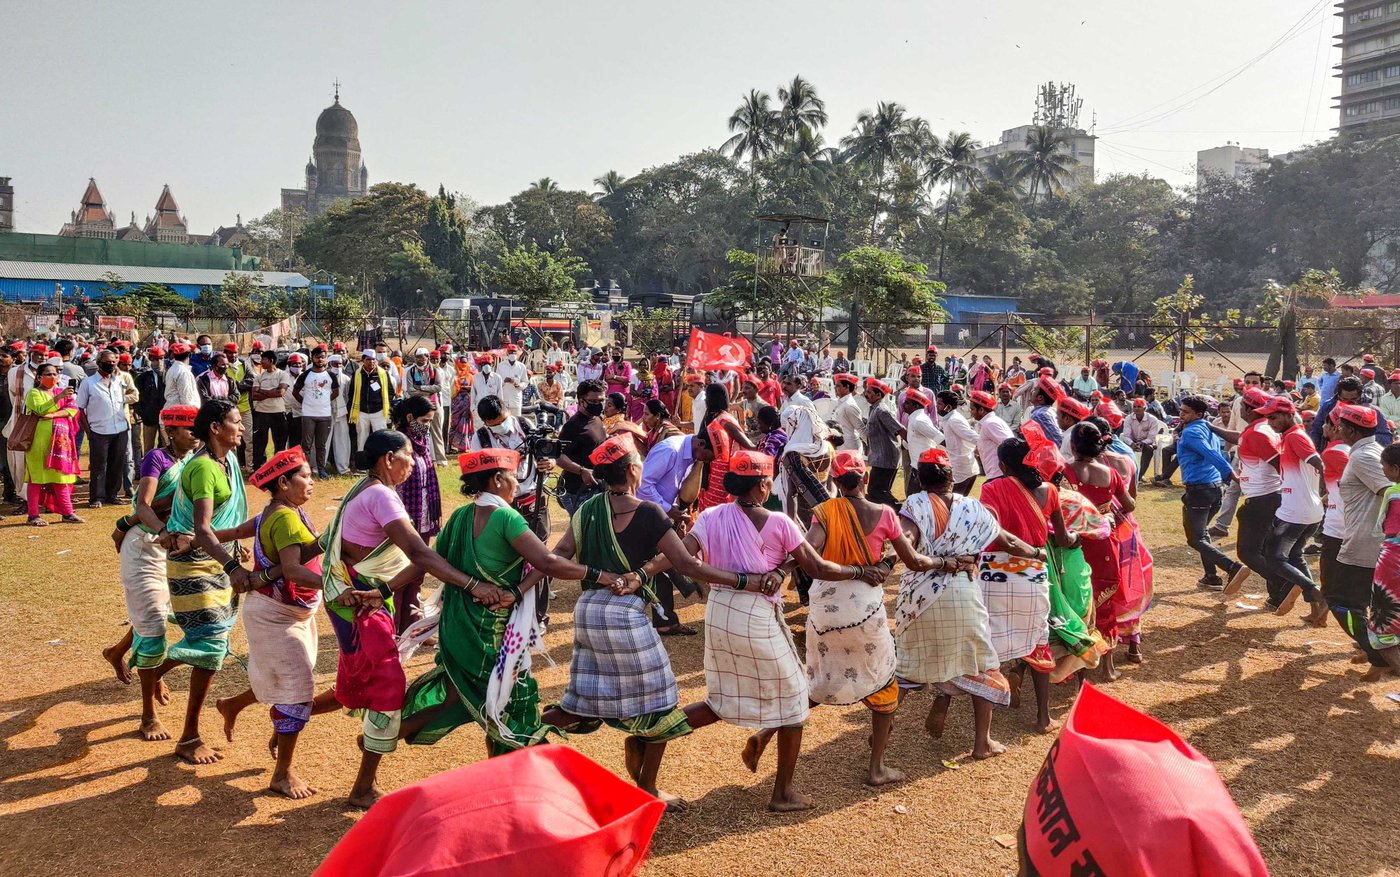 At Mumbai's Azad Maidan, at a farmers' protest in late January, dhumsi and tarpa players from Adivasi communities in Maharashtra's Dahanu taluka opposed the new farm laws through song and dance